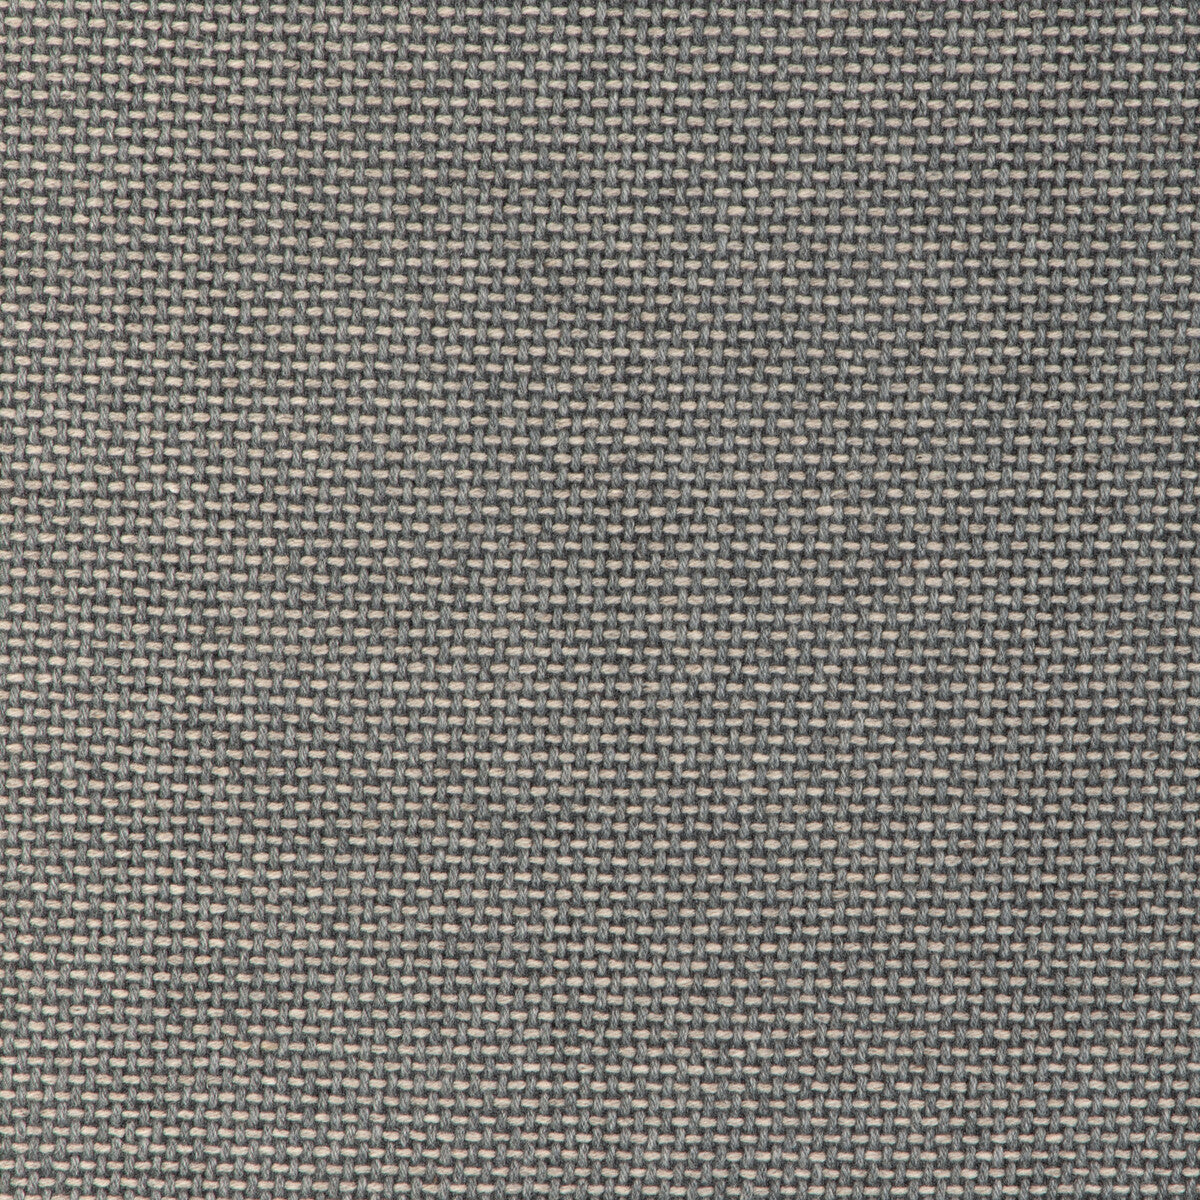 Easton Wool fabric in stone wall color - pattern 37027.52.0 - by Kravet Contract